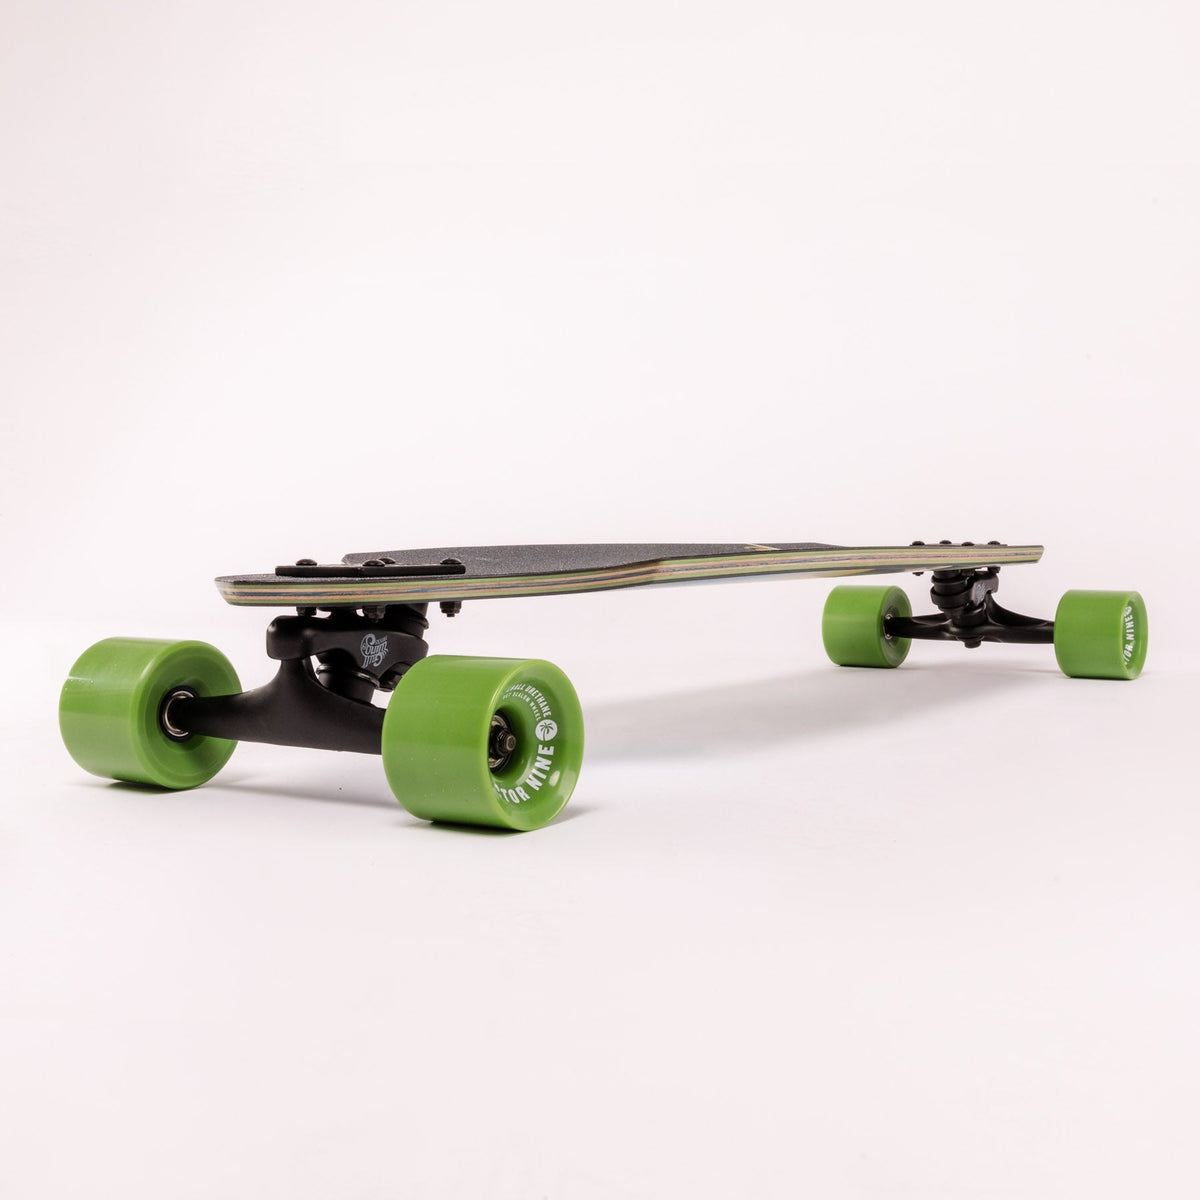 Sector 9 Roundhouse Roll Carving complete